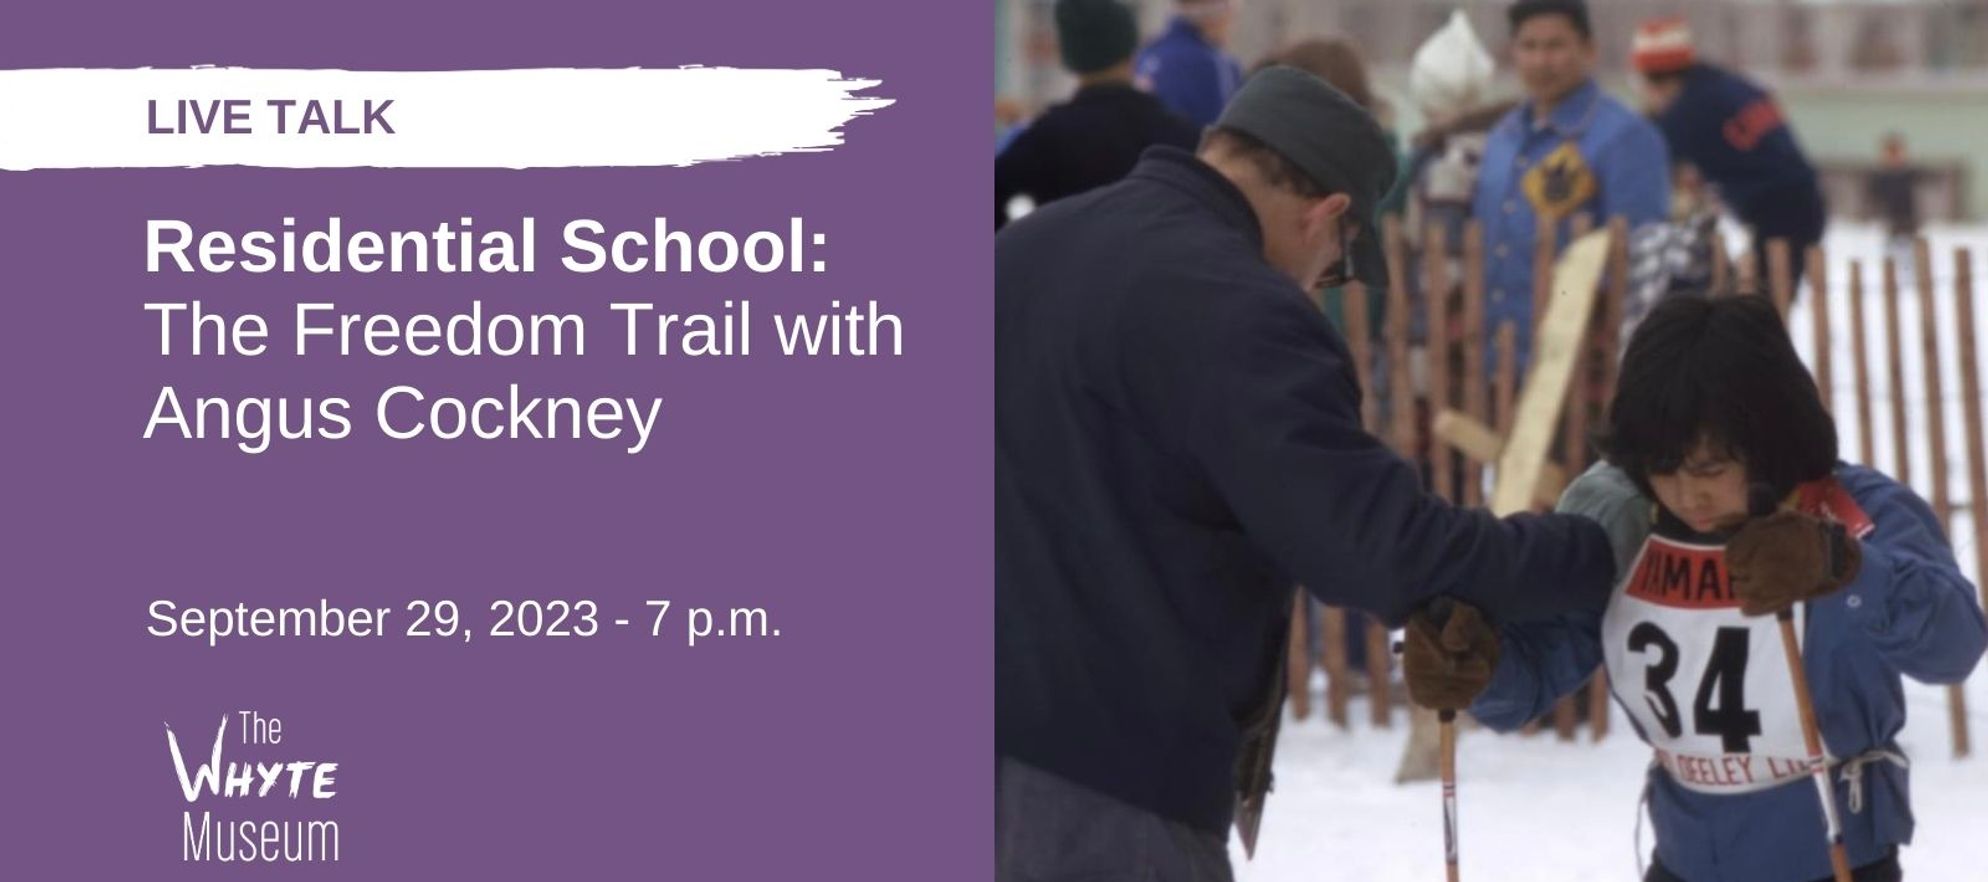 Residential School: The Freedom Trail with Angus Cockney 